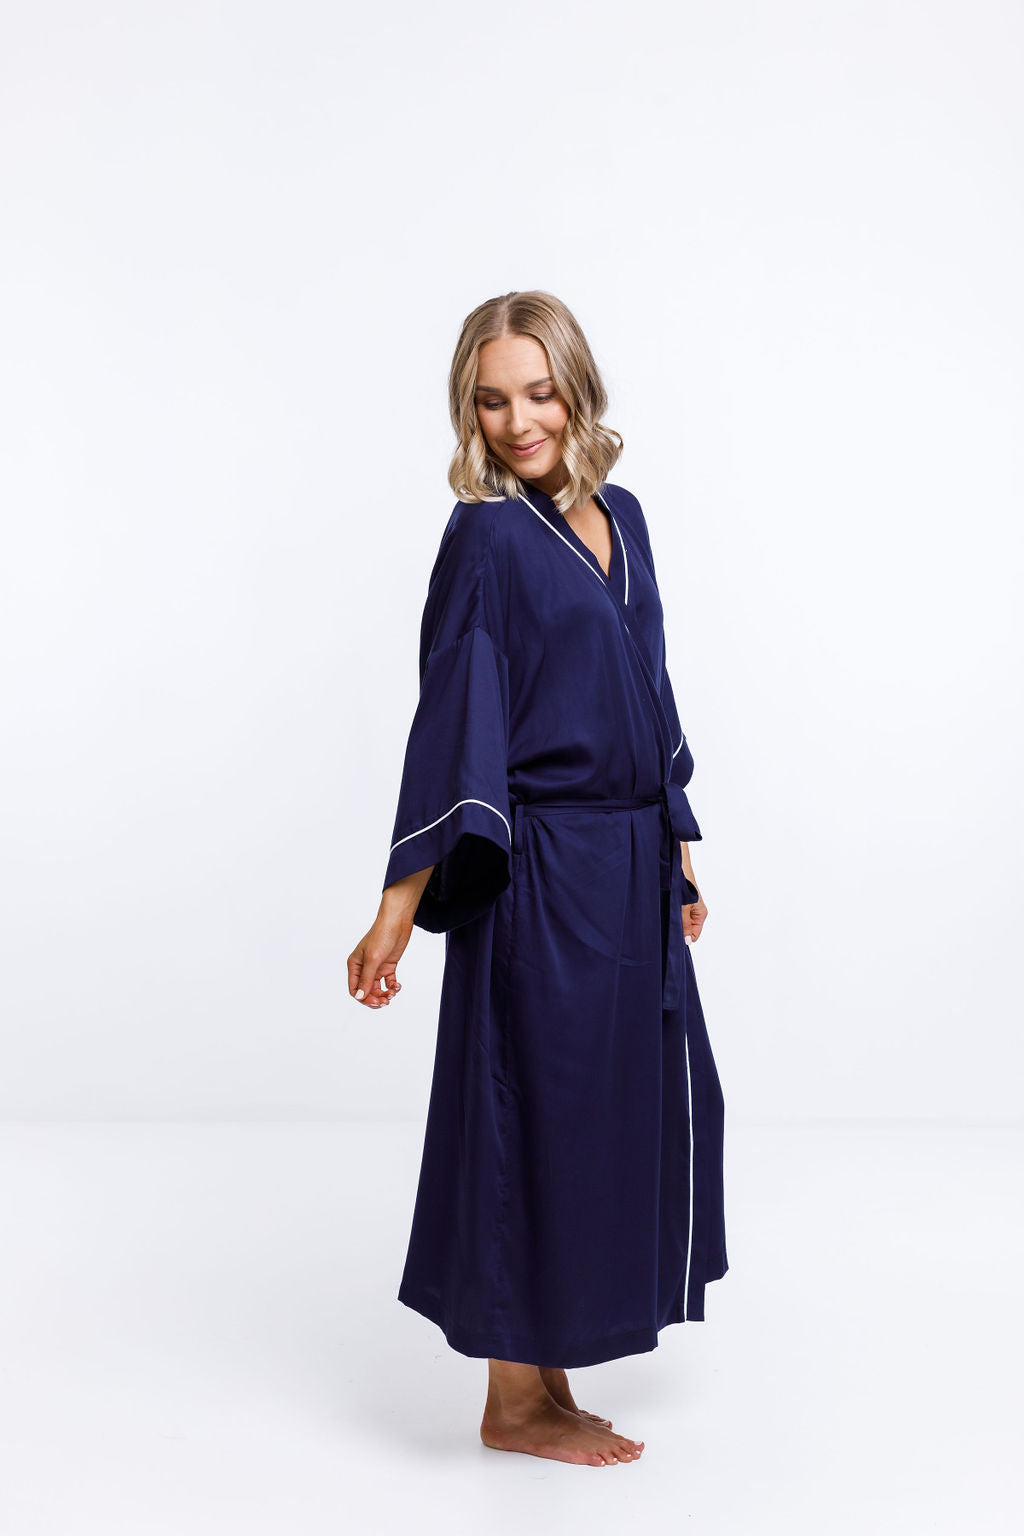 Royale Robe - Ink Blue with White Trim